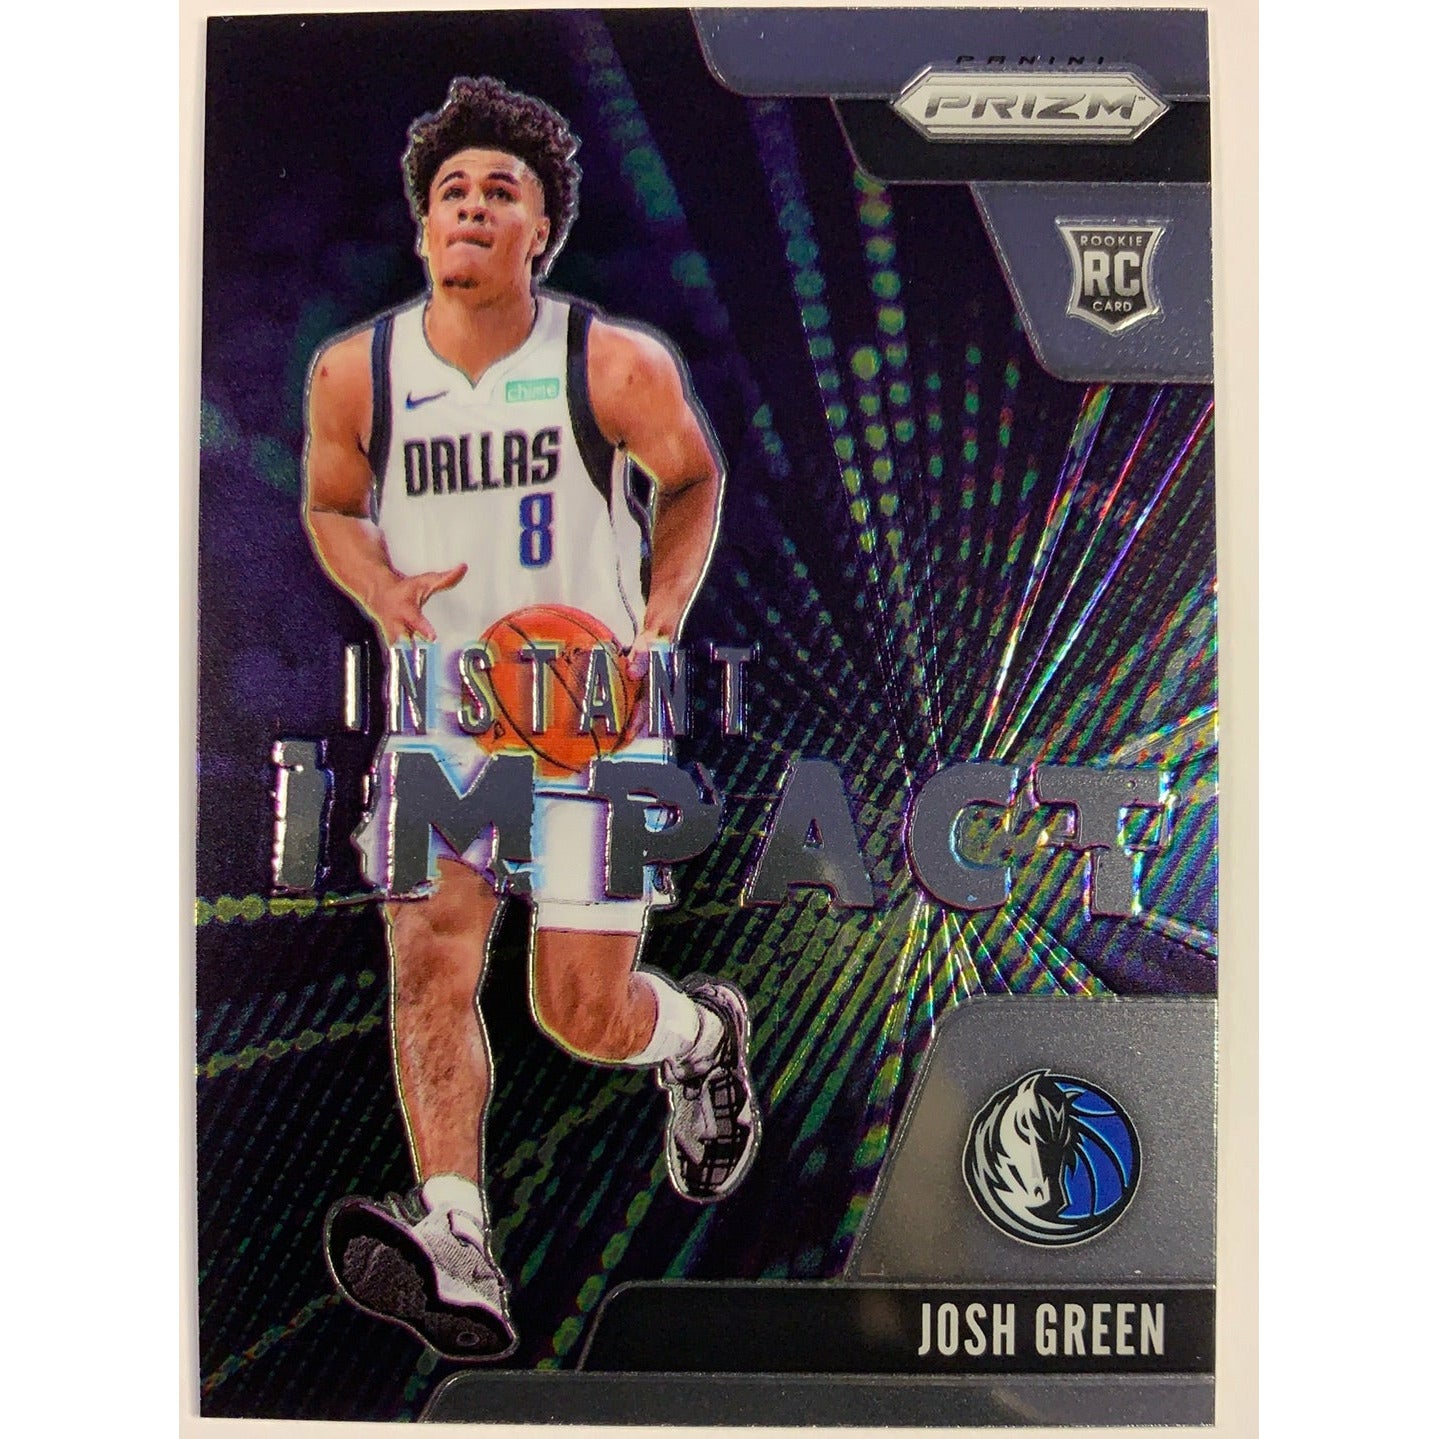  2020-21 Prizm Josh Green Instant Impact RC  Local Legends Cards & Collectibles